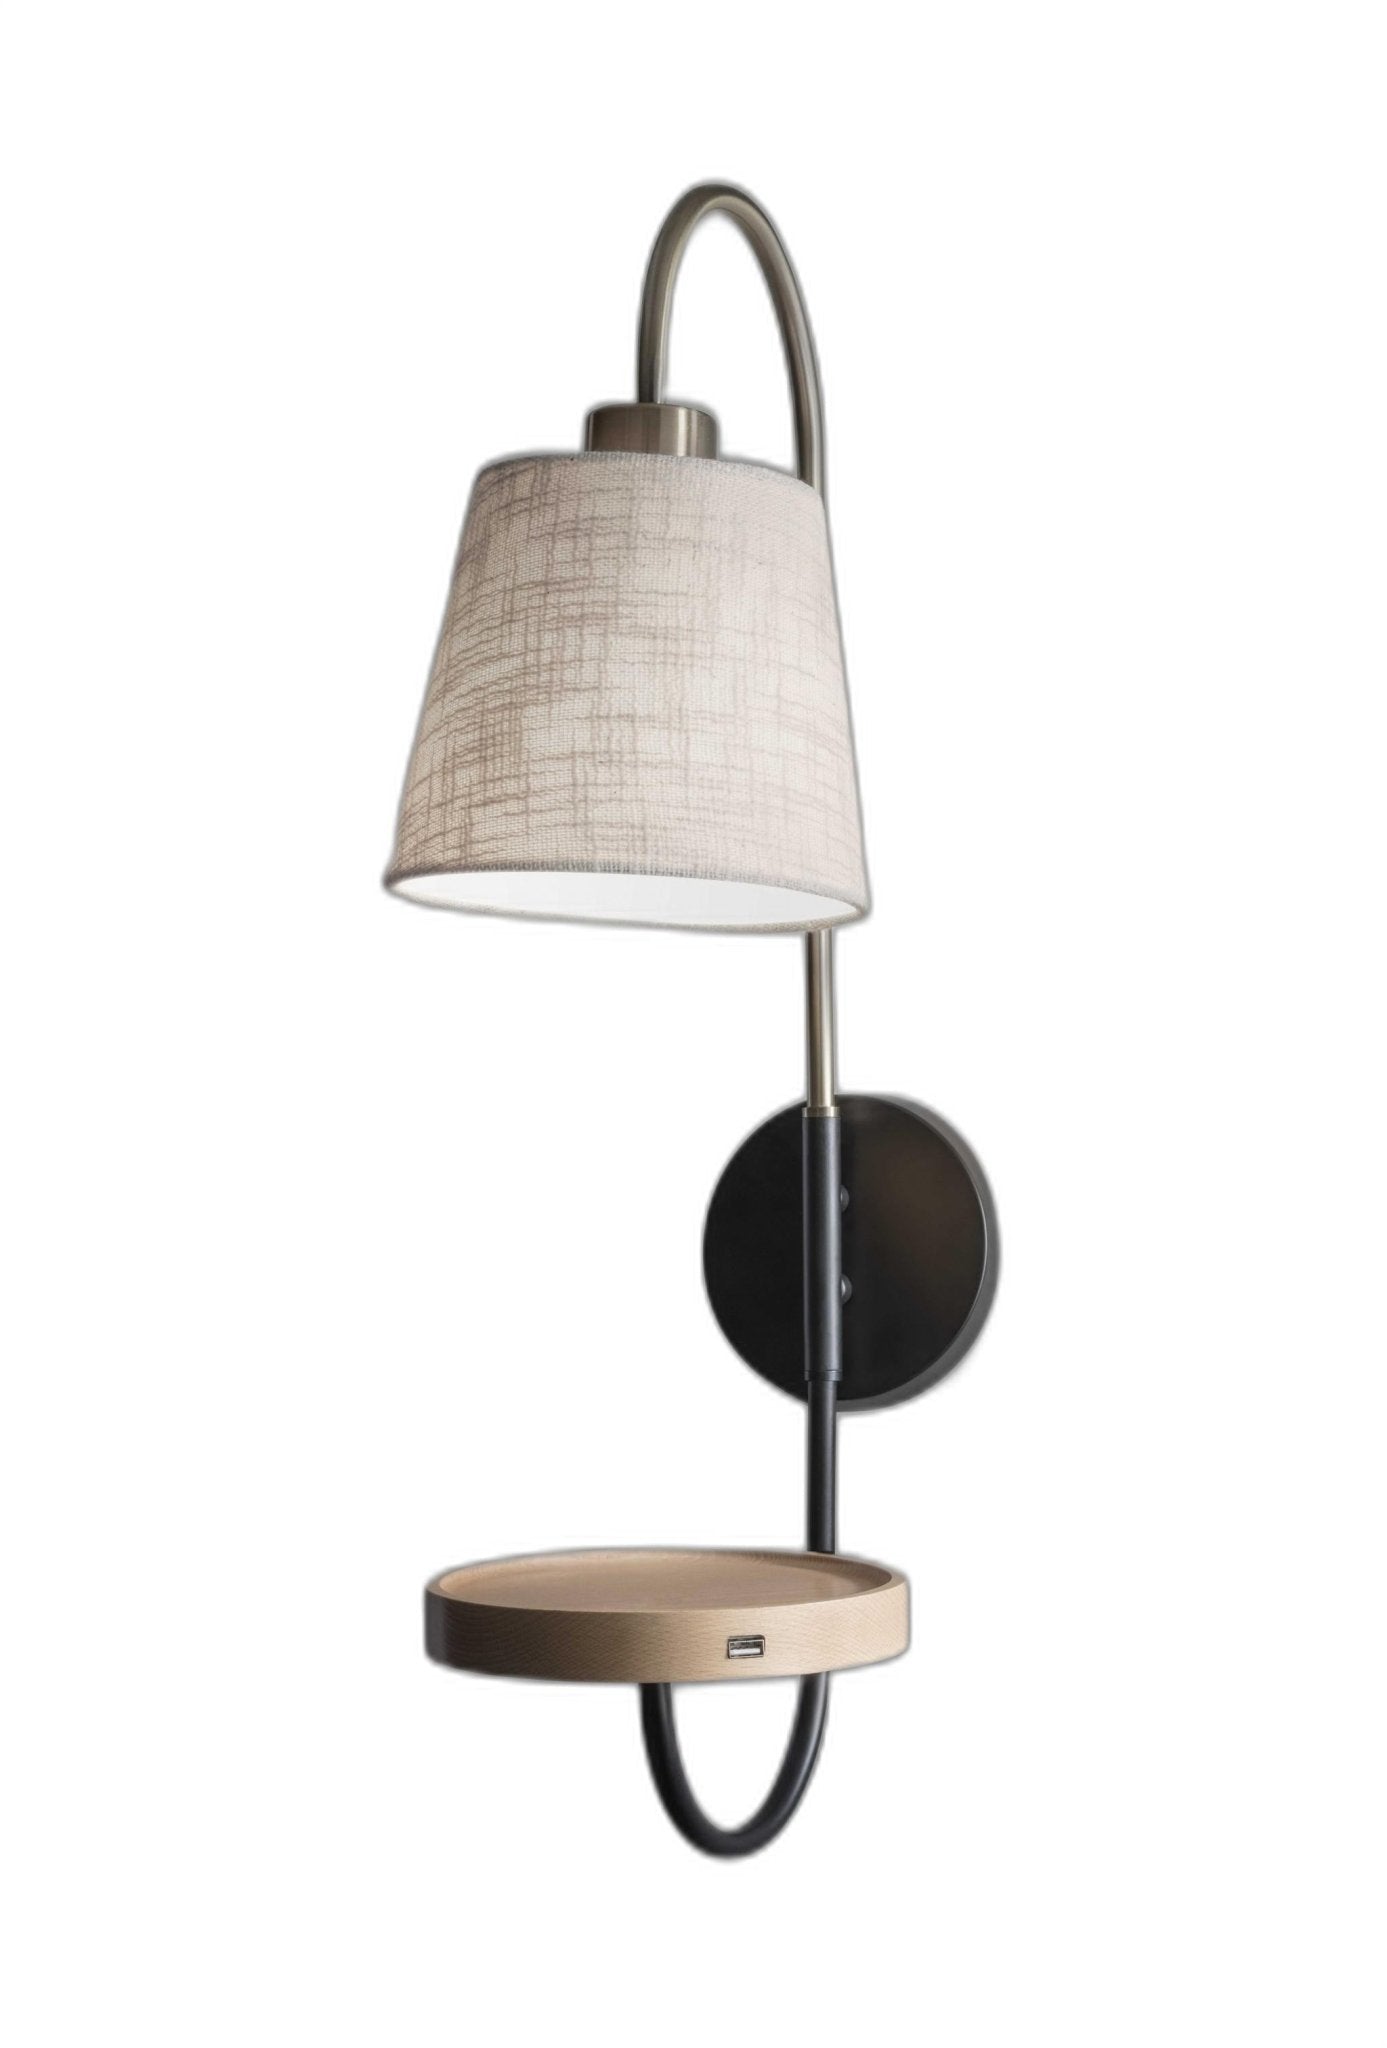 Antique Brass And Black Metal Wall Lamp With Usb Charging Station Wood Shelf - Tuesday Morning-Wall Lighting